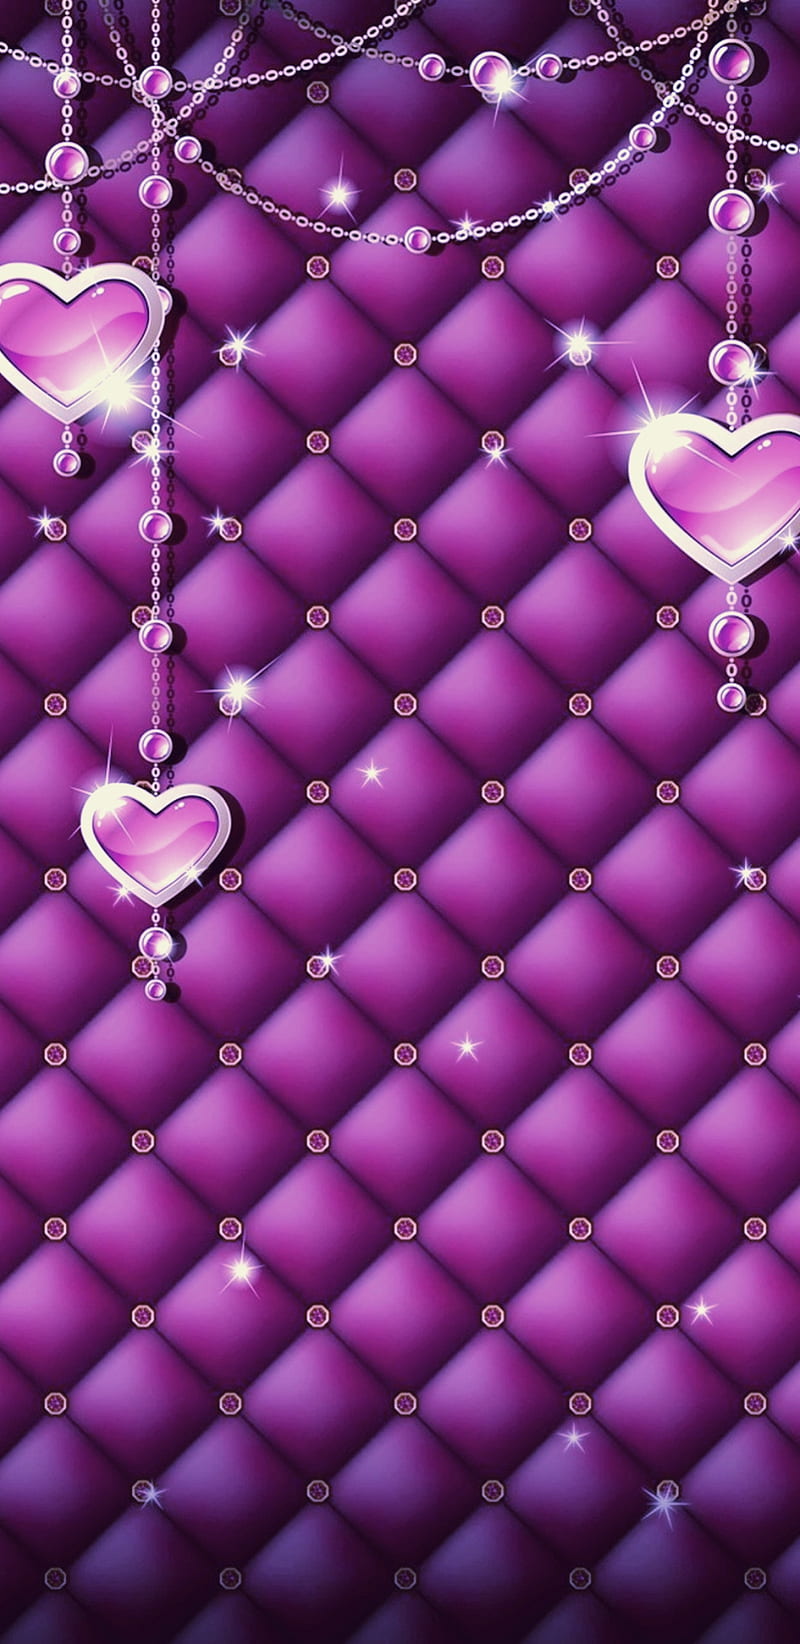 Violet Charm, charm, girly, heart, corazones, padded, pretty, sparkle, violet, HD phone wallpaper